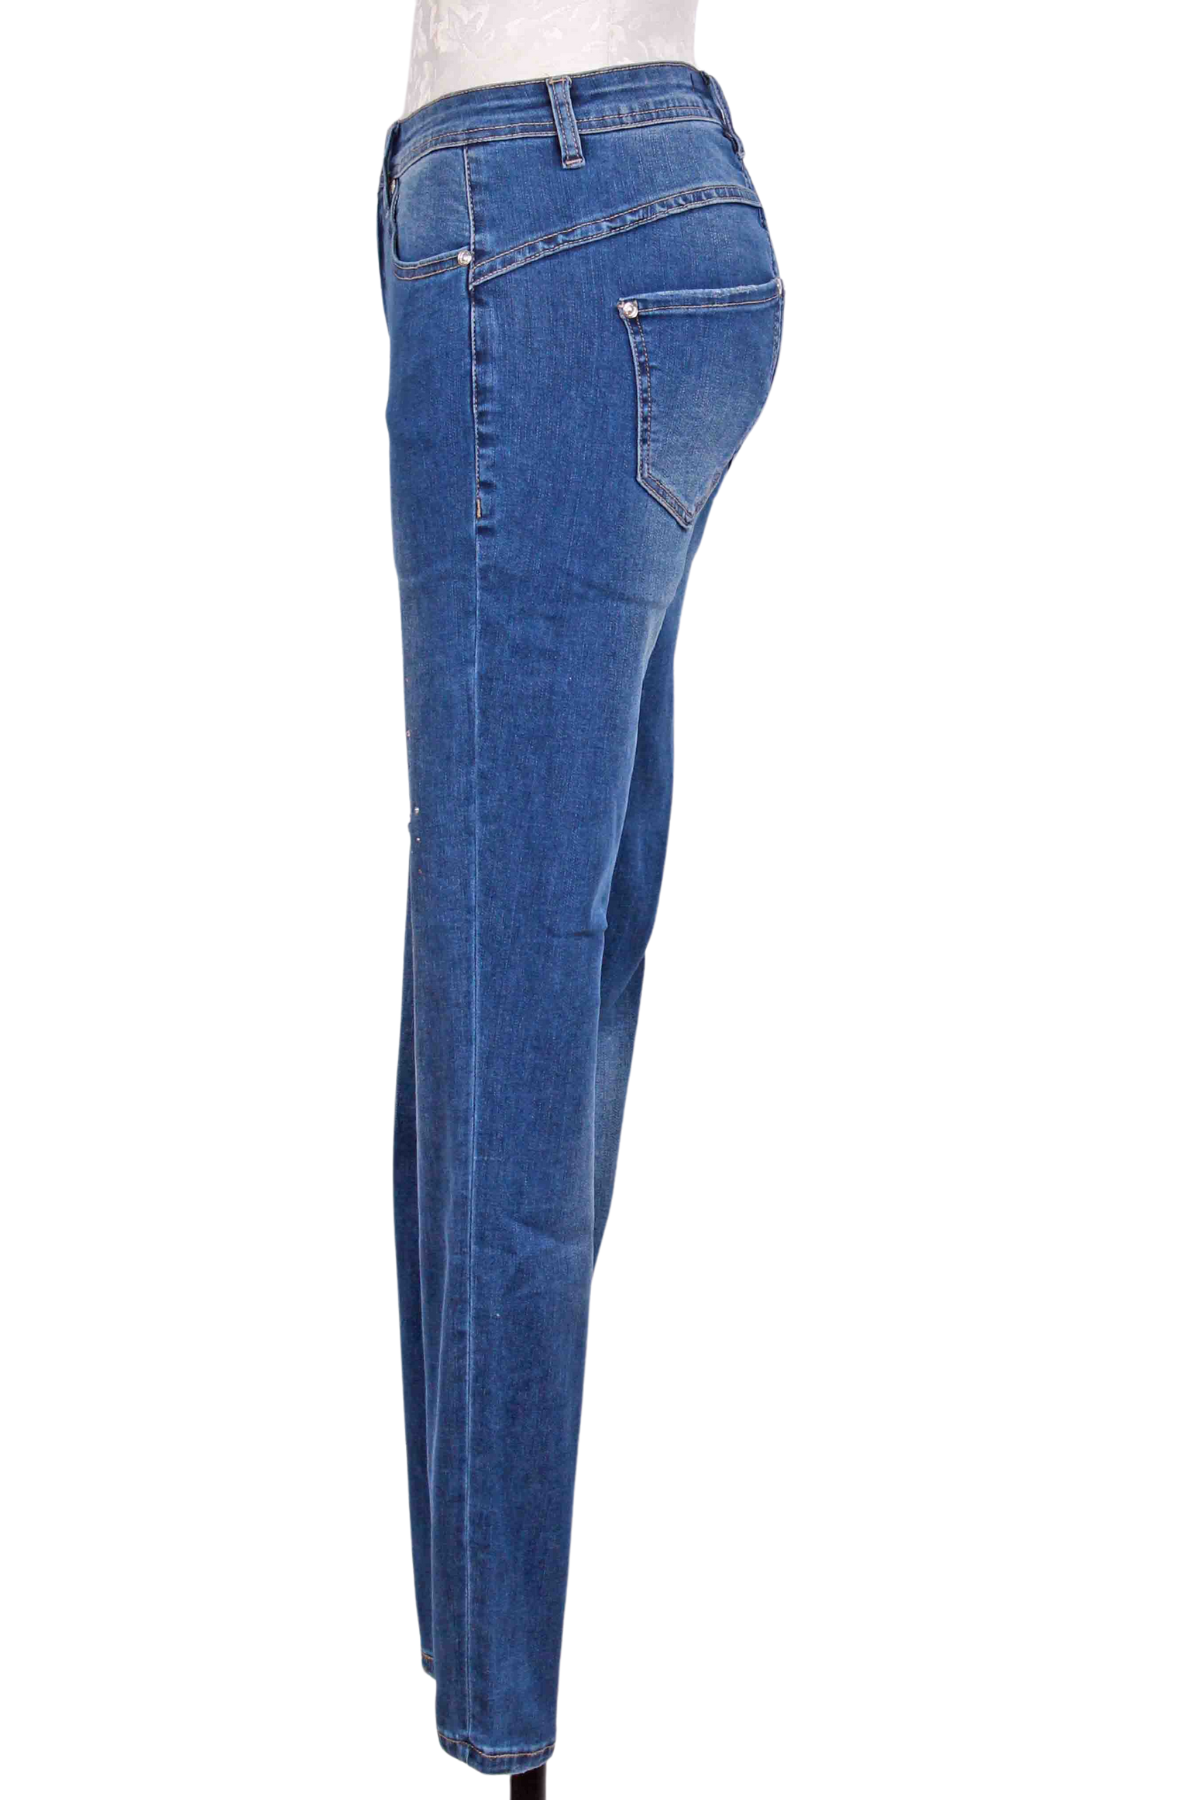 Side view of Sequin Star Embellished Jean by Frank Lyman